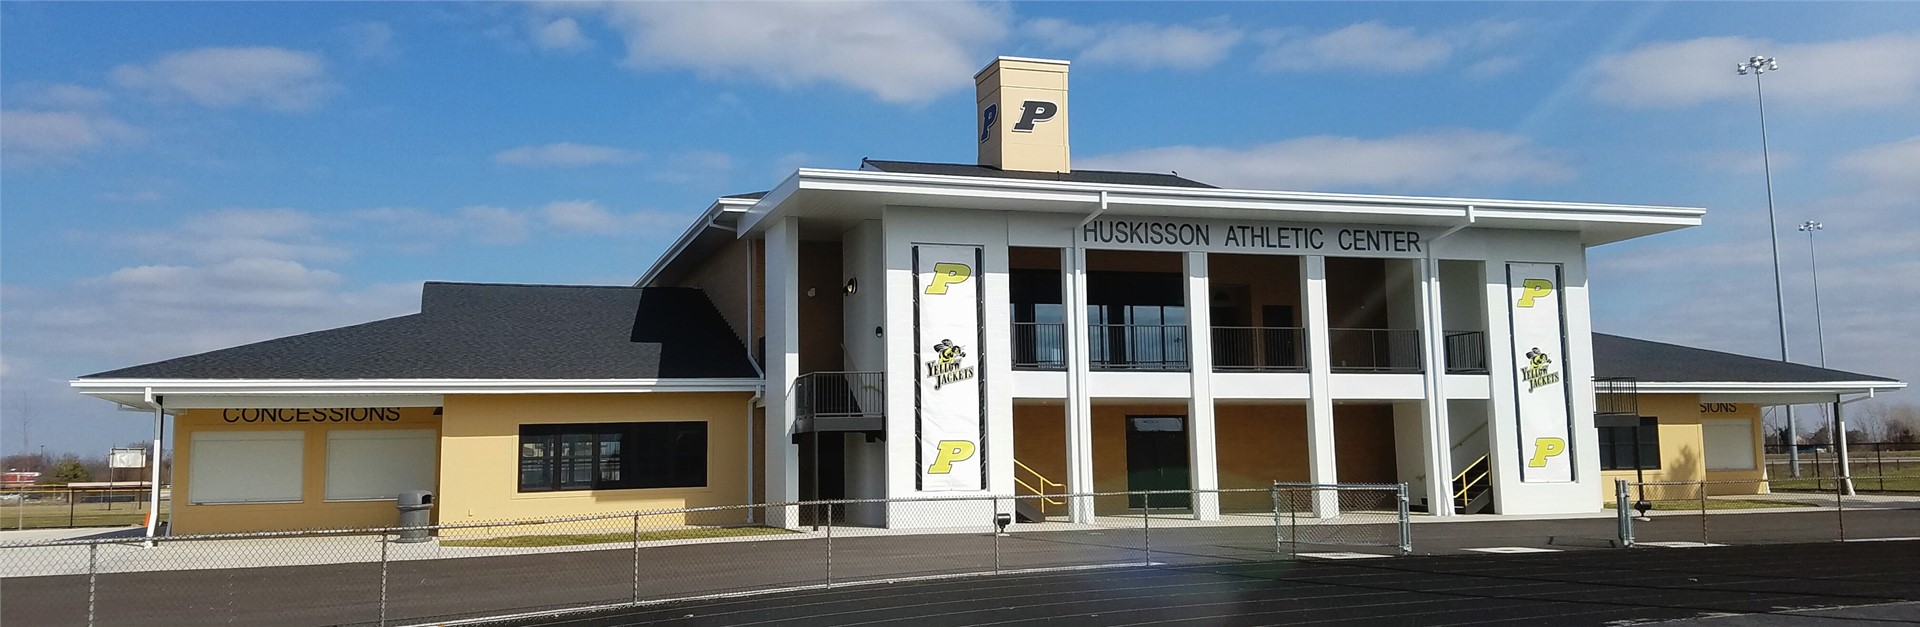 Huskisson Athletic Center - exterior photo of front of building